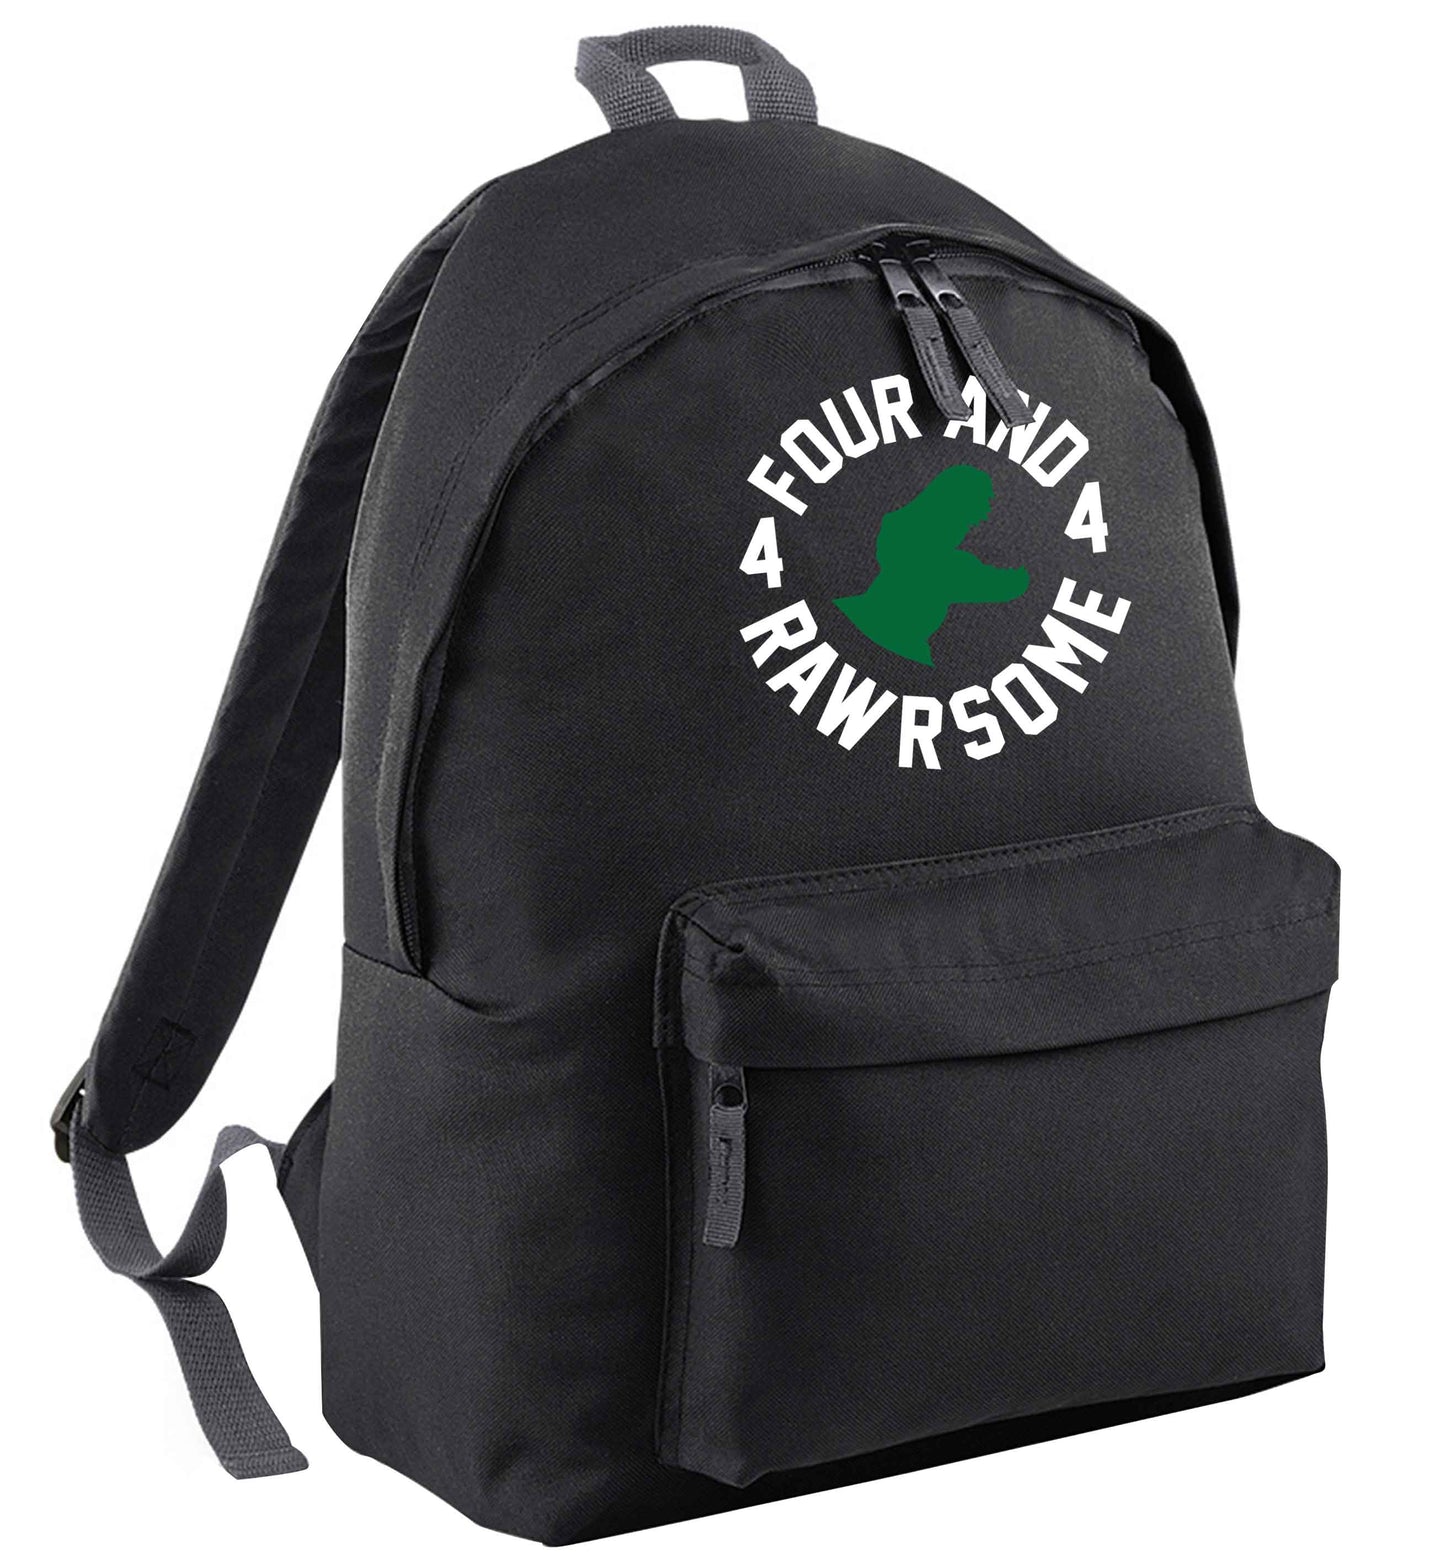 Four and rawrsome | Children's backpack